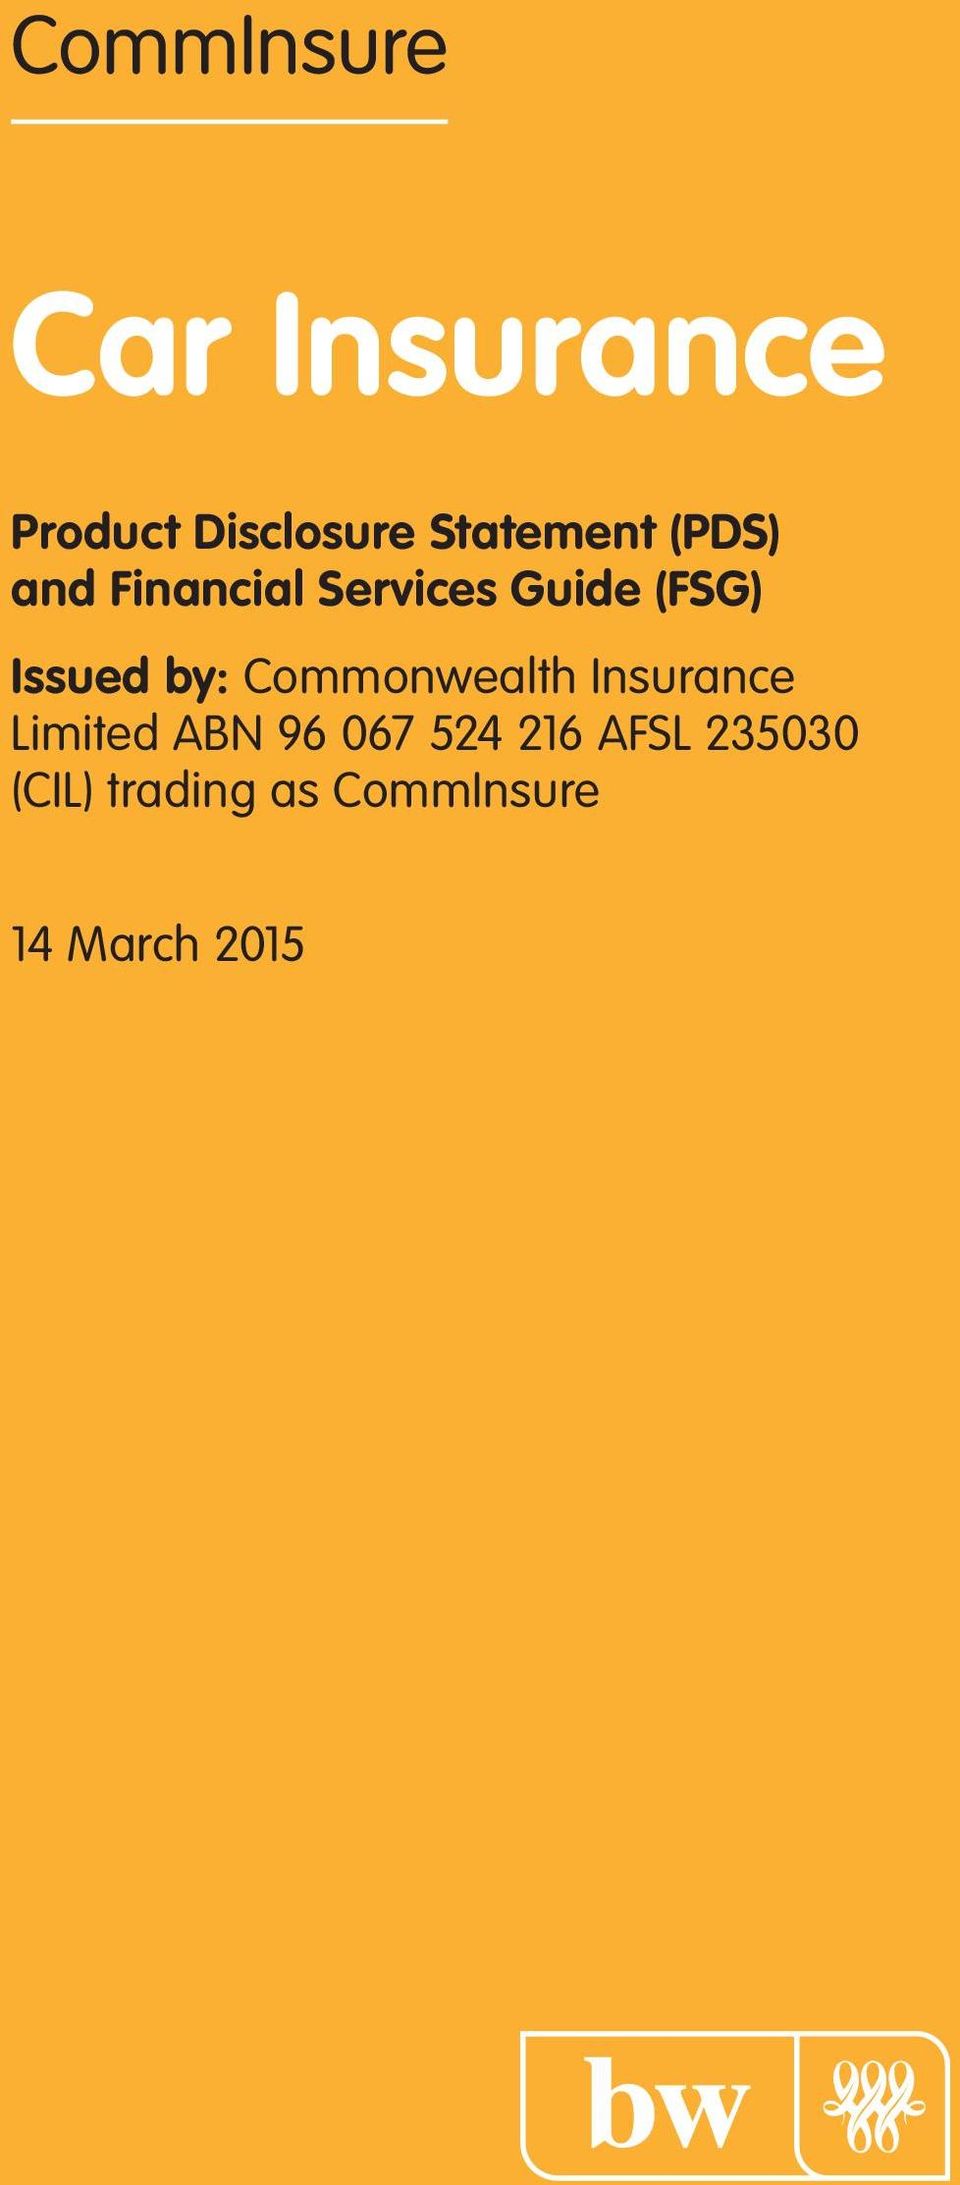 Issued by: Commonwealth Insurance Limited ABN 96 067